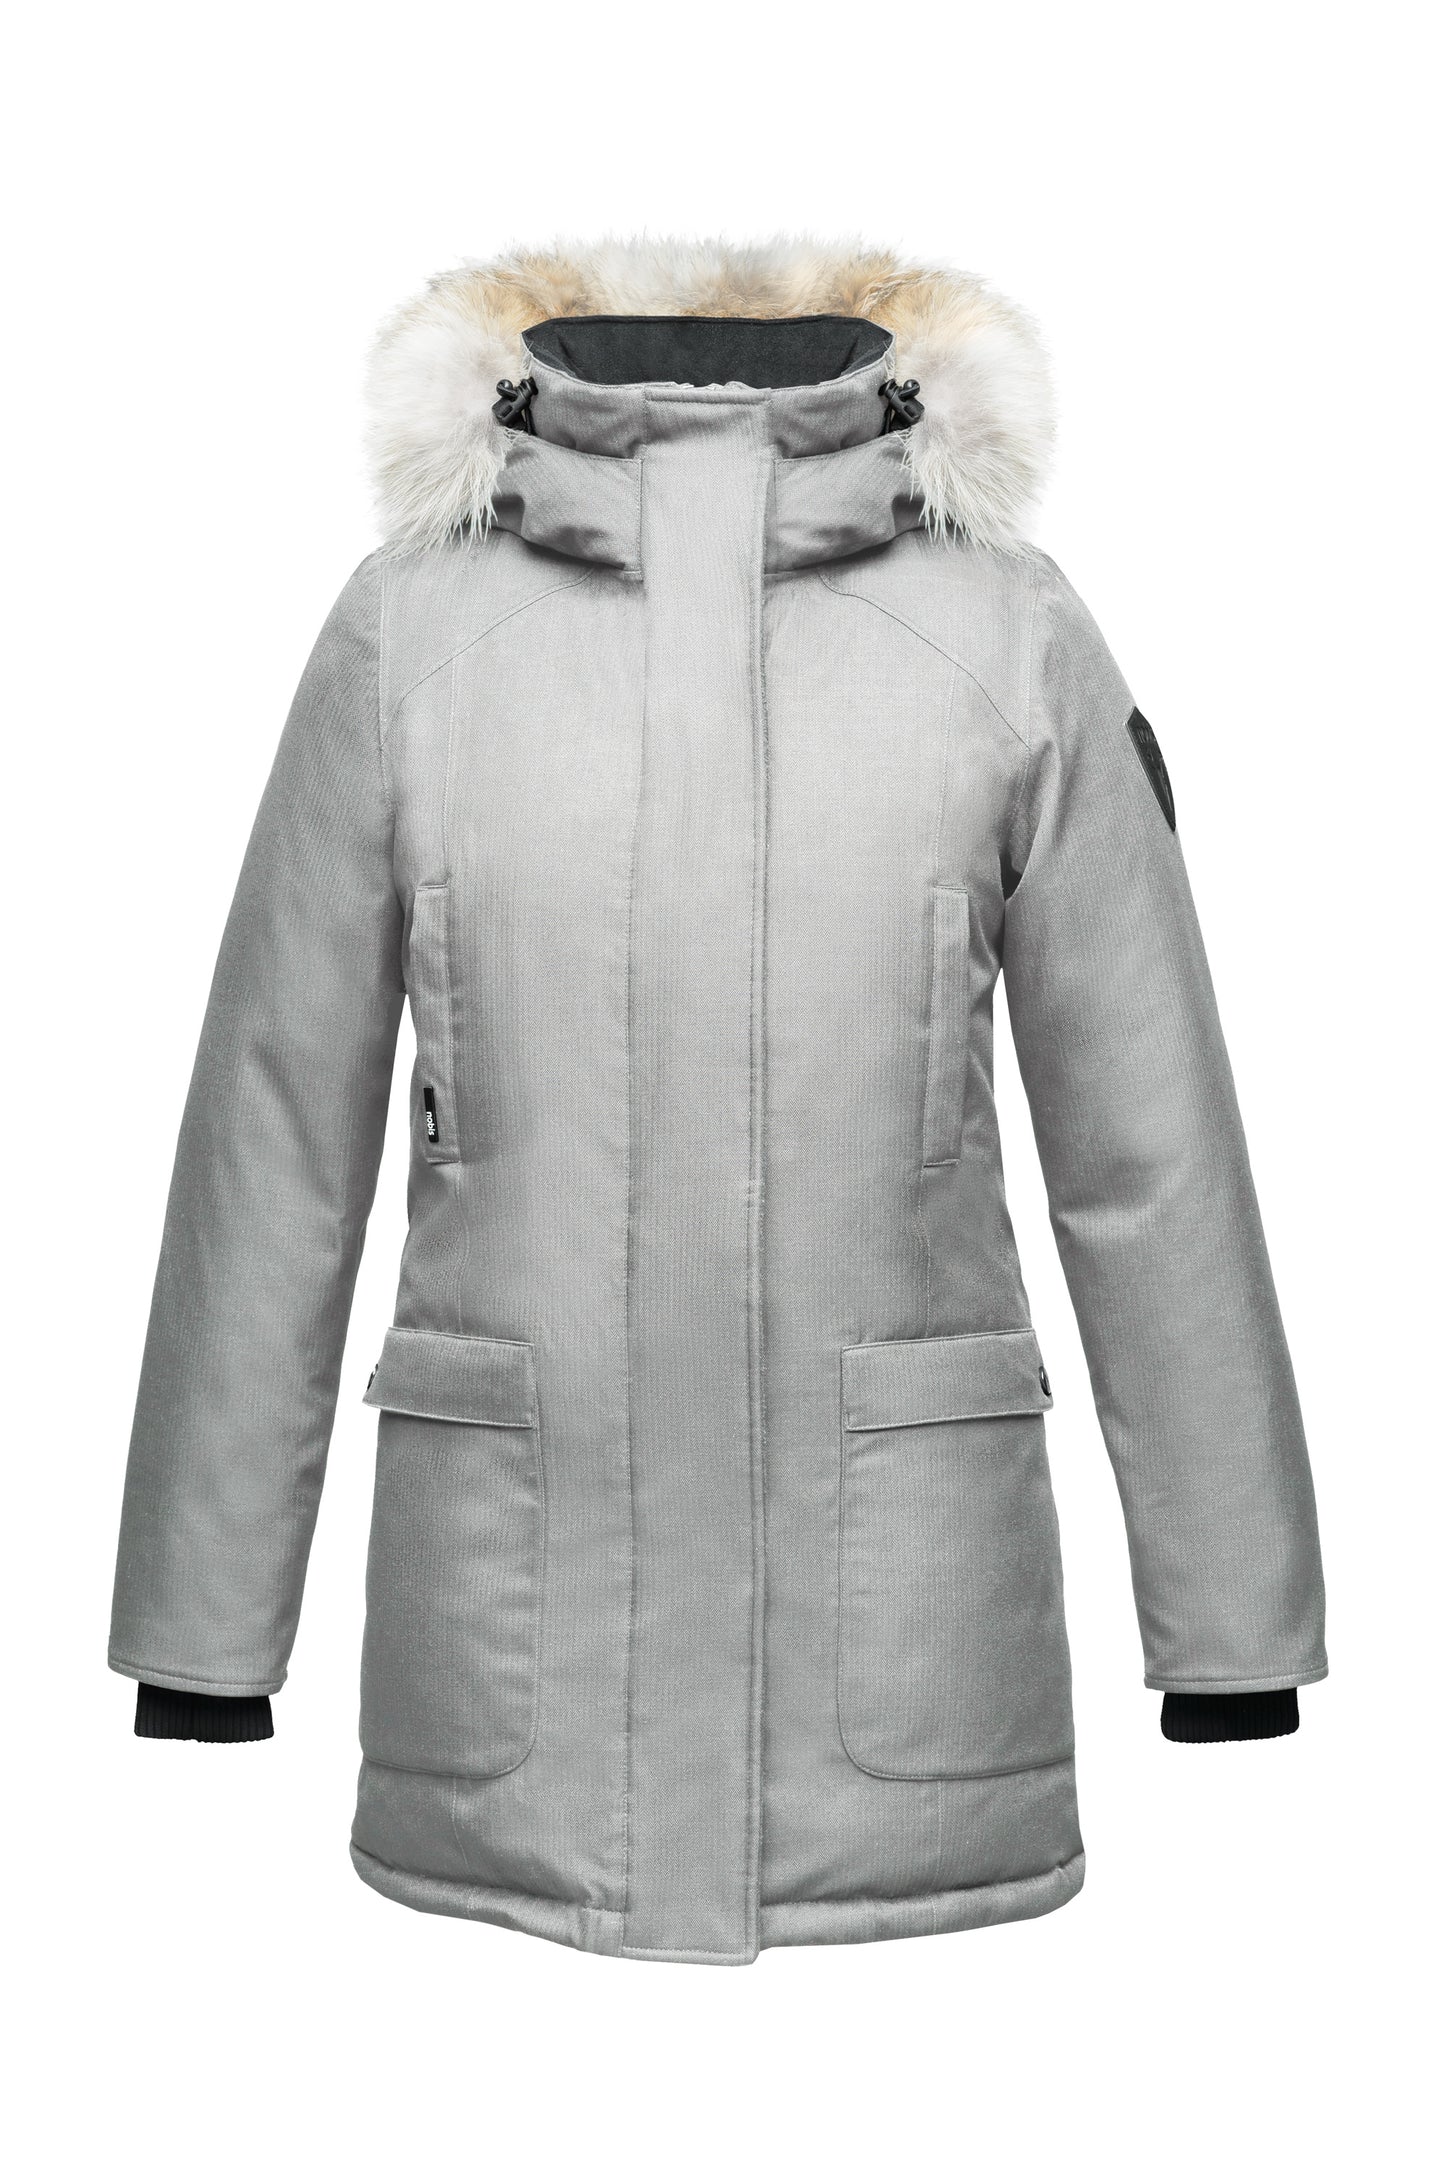 Women's down filled parka that sits just below the hip with a clean look and two hip patch pockets in Light Grey